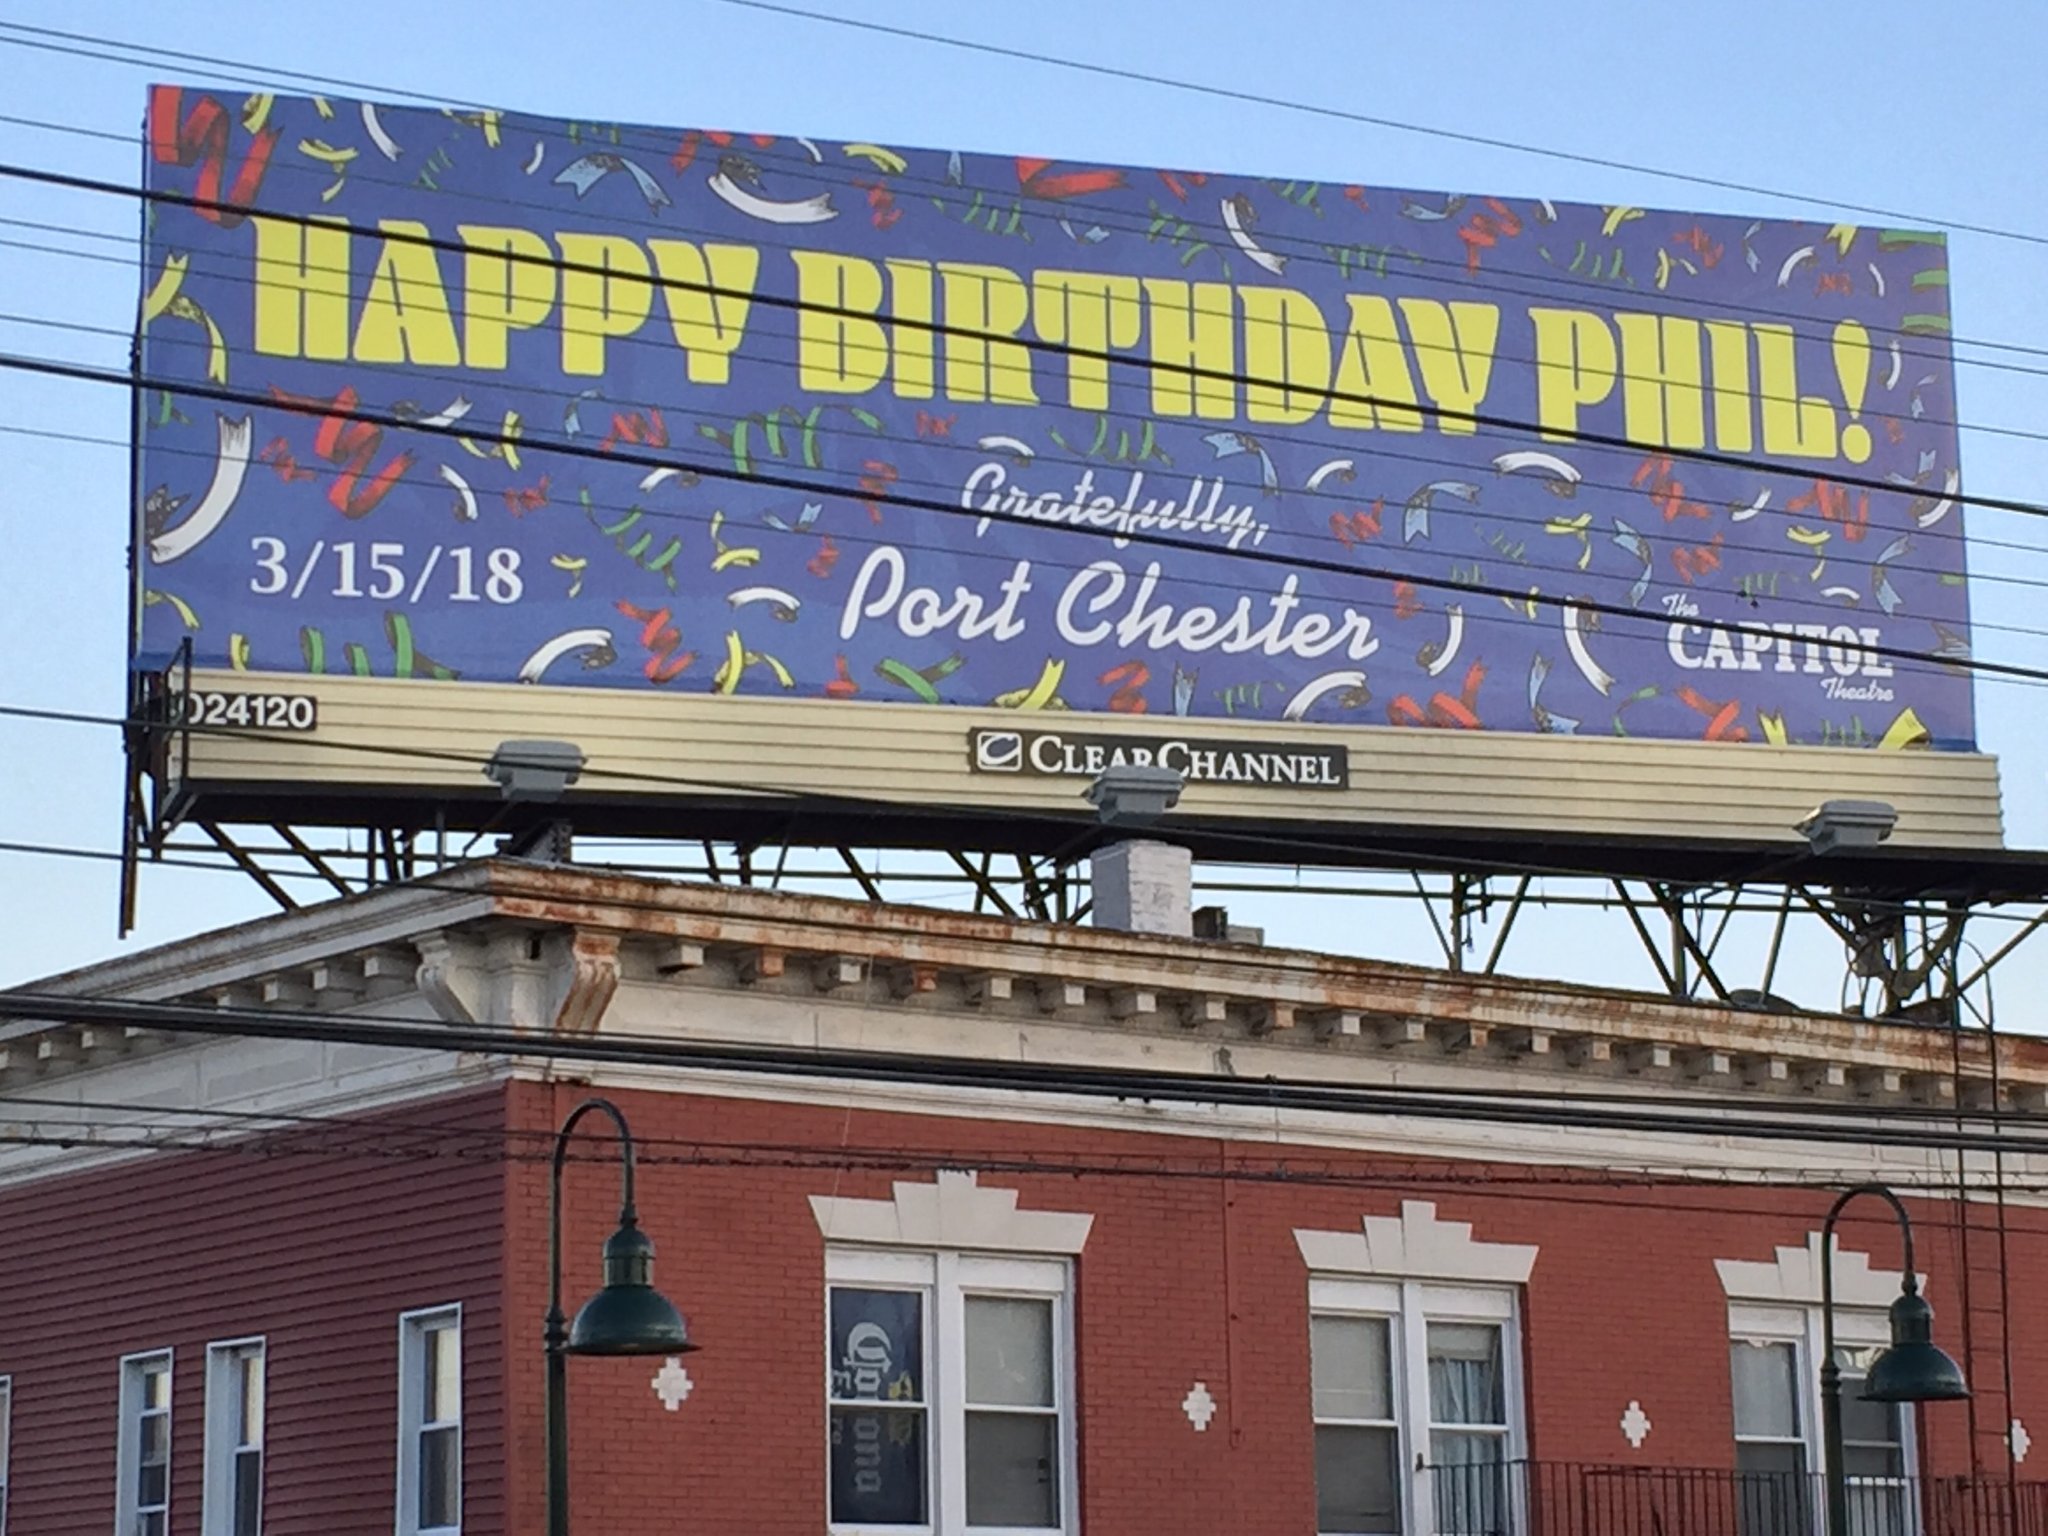 Wow, happy birthday Phil Lesh.  Nice sign in Port Chester. 